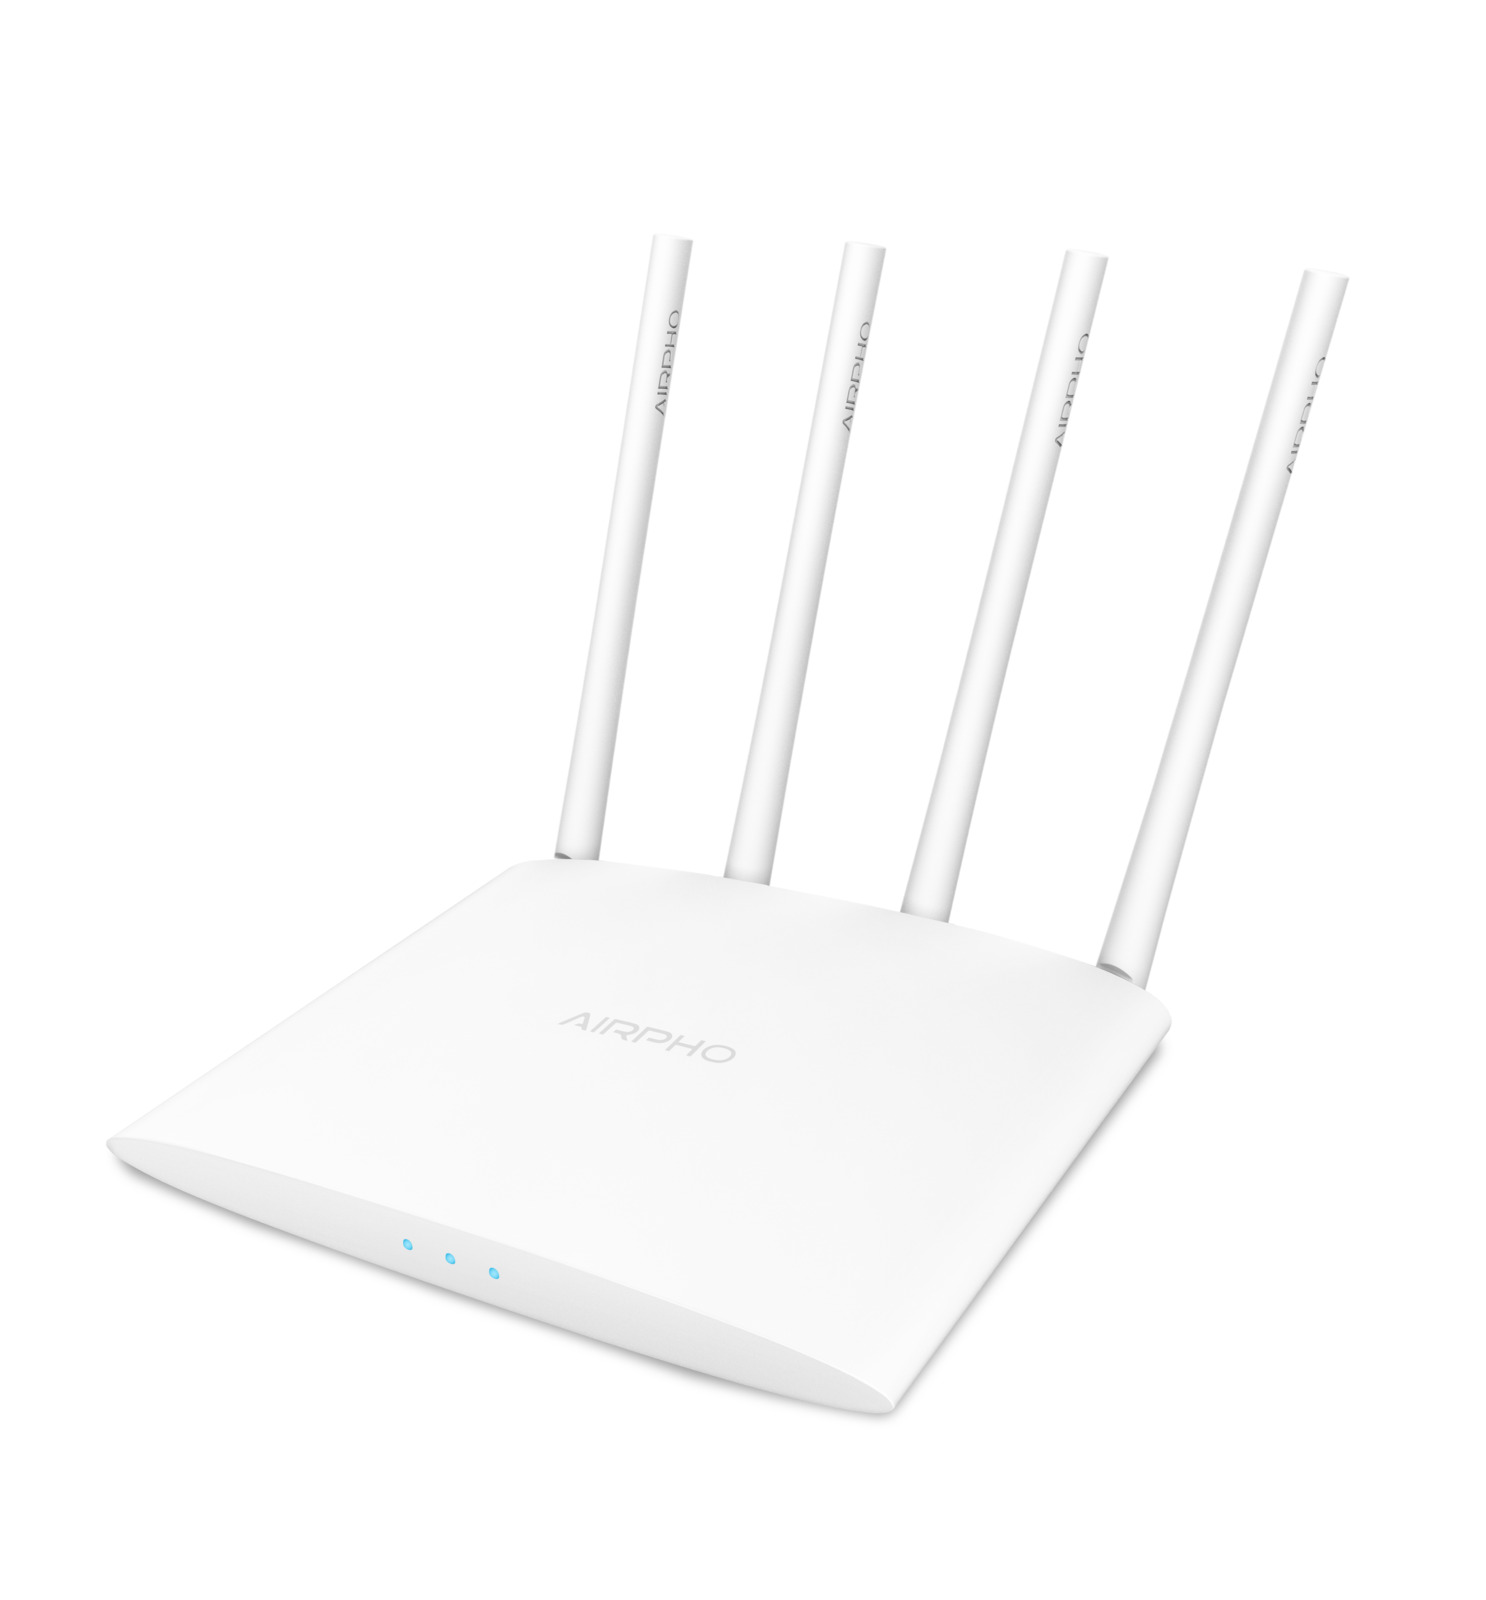 AIRPHO AR-W400 WLAN Router 1200 Mbit/s